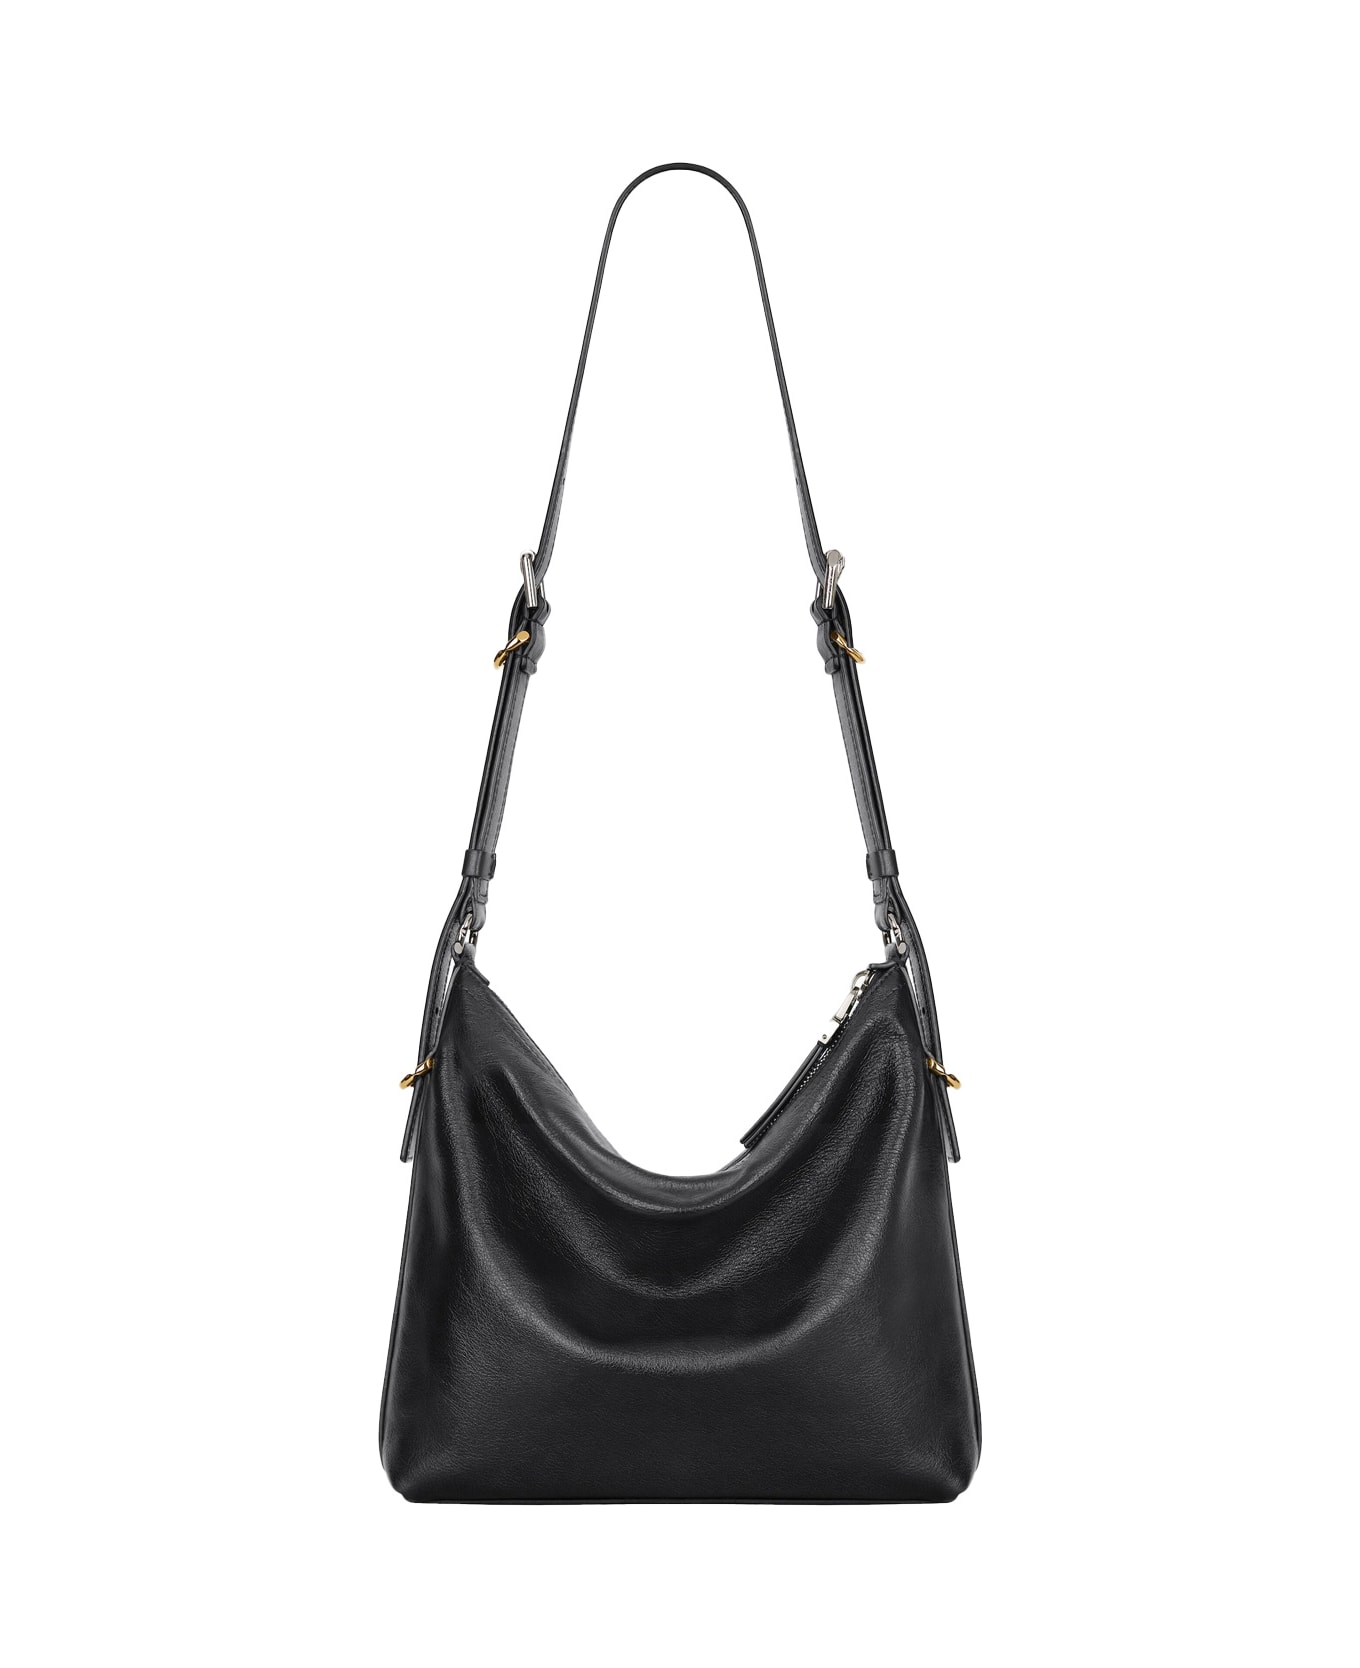 Givenchy Voyou Crossbody Bag In Black Leather - Black